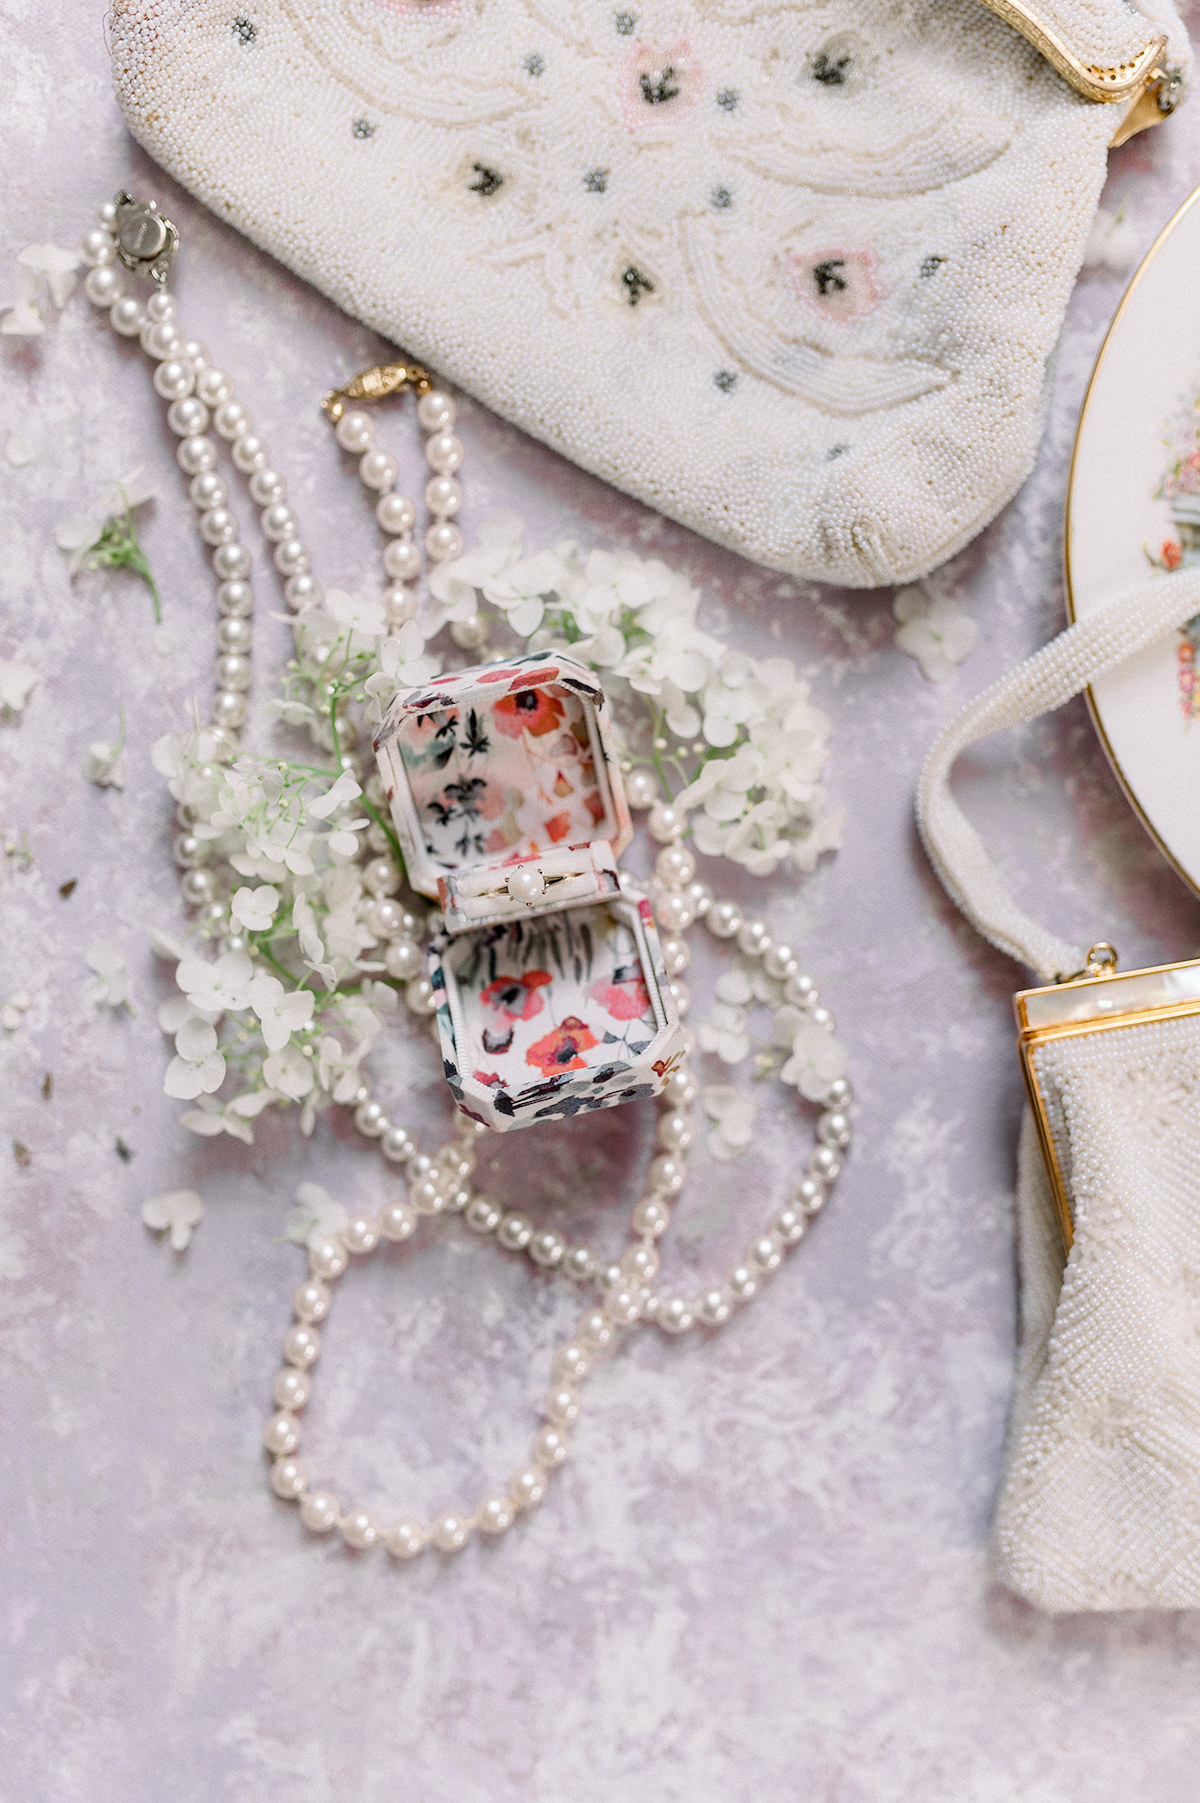 A top-down view of exquisite bridal accessories resting on a hand-painted backdrop, adding a touch of sophistication to the editorial.